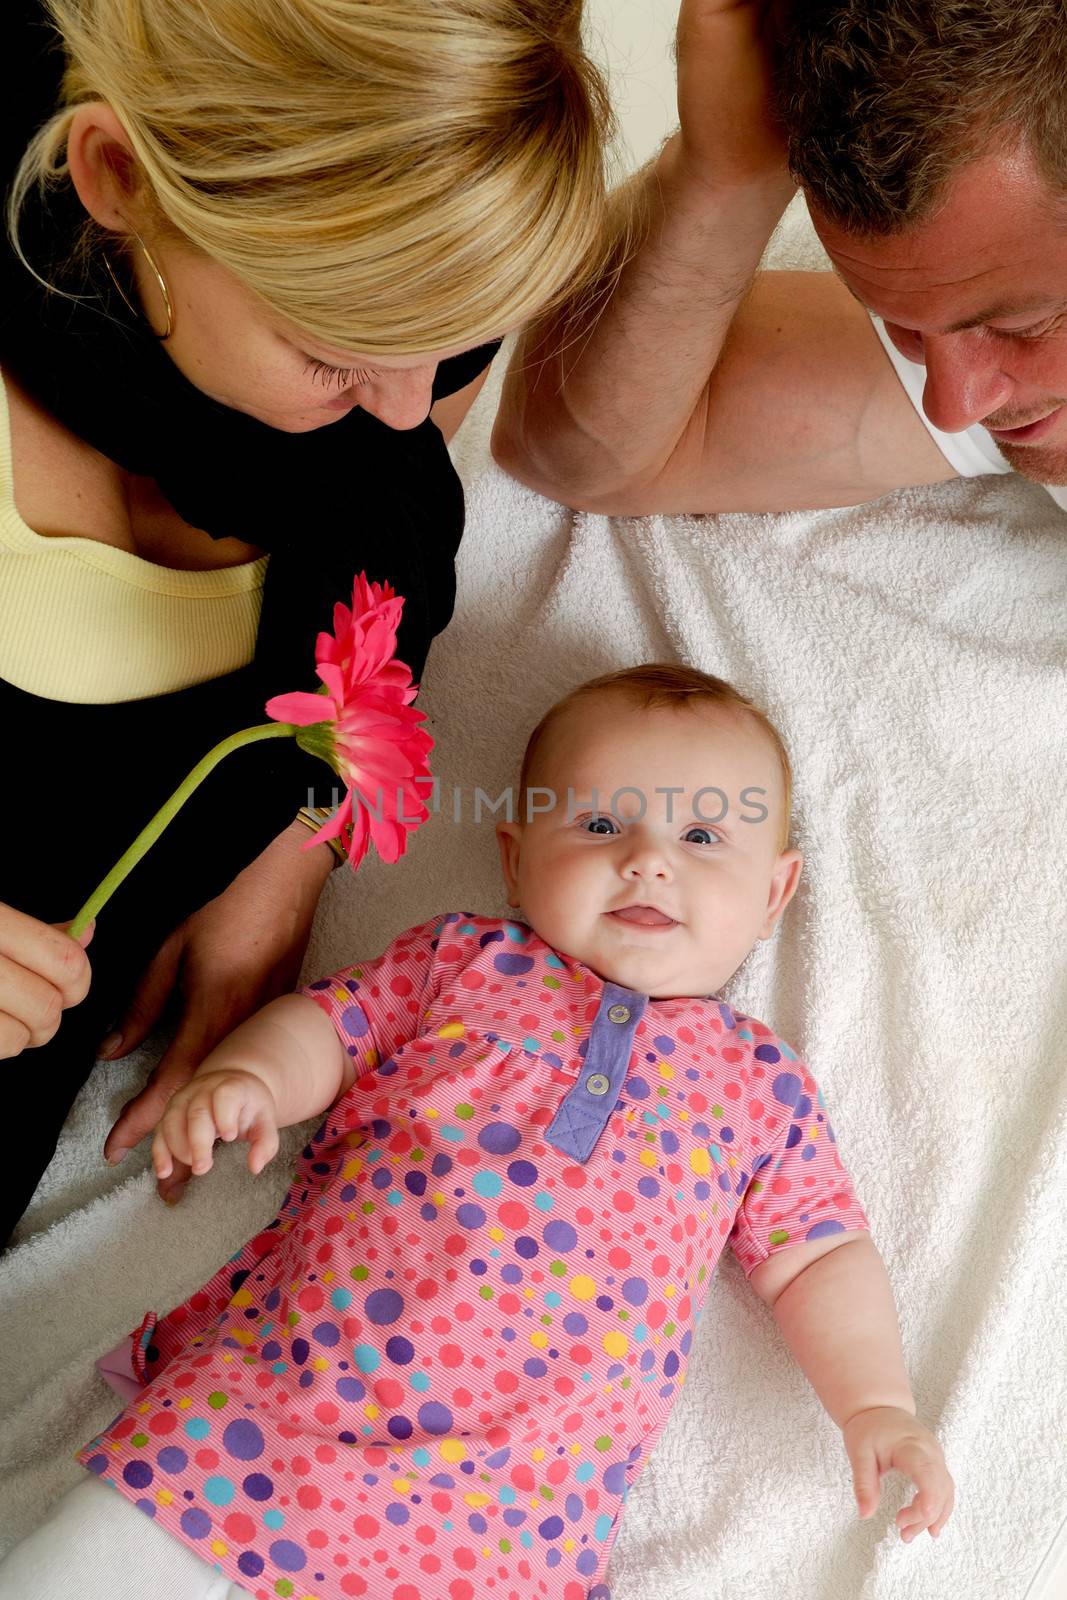 Mother and father are looking at their sweet smiling 4 month old baby.